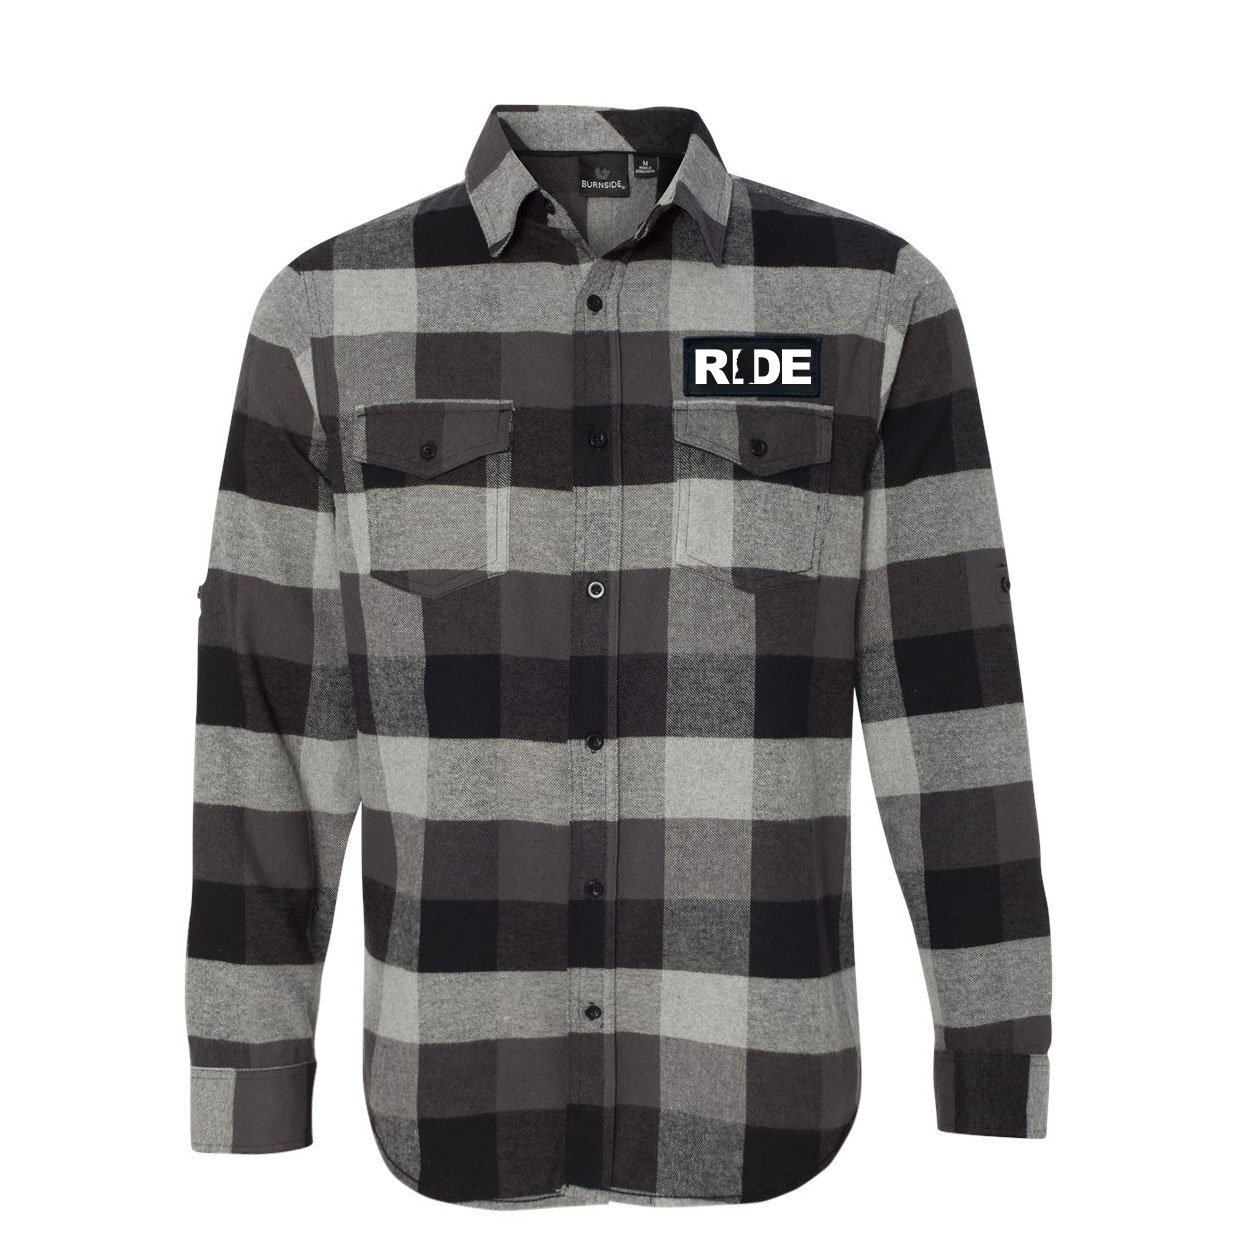 Ride Mississippi Classic Unisex Long Sleeve Woven Patch Flannel Shirt Black/Gray (White Logo)